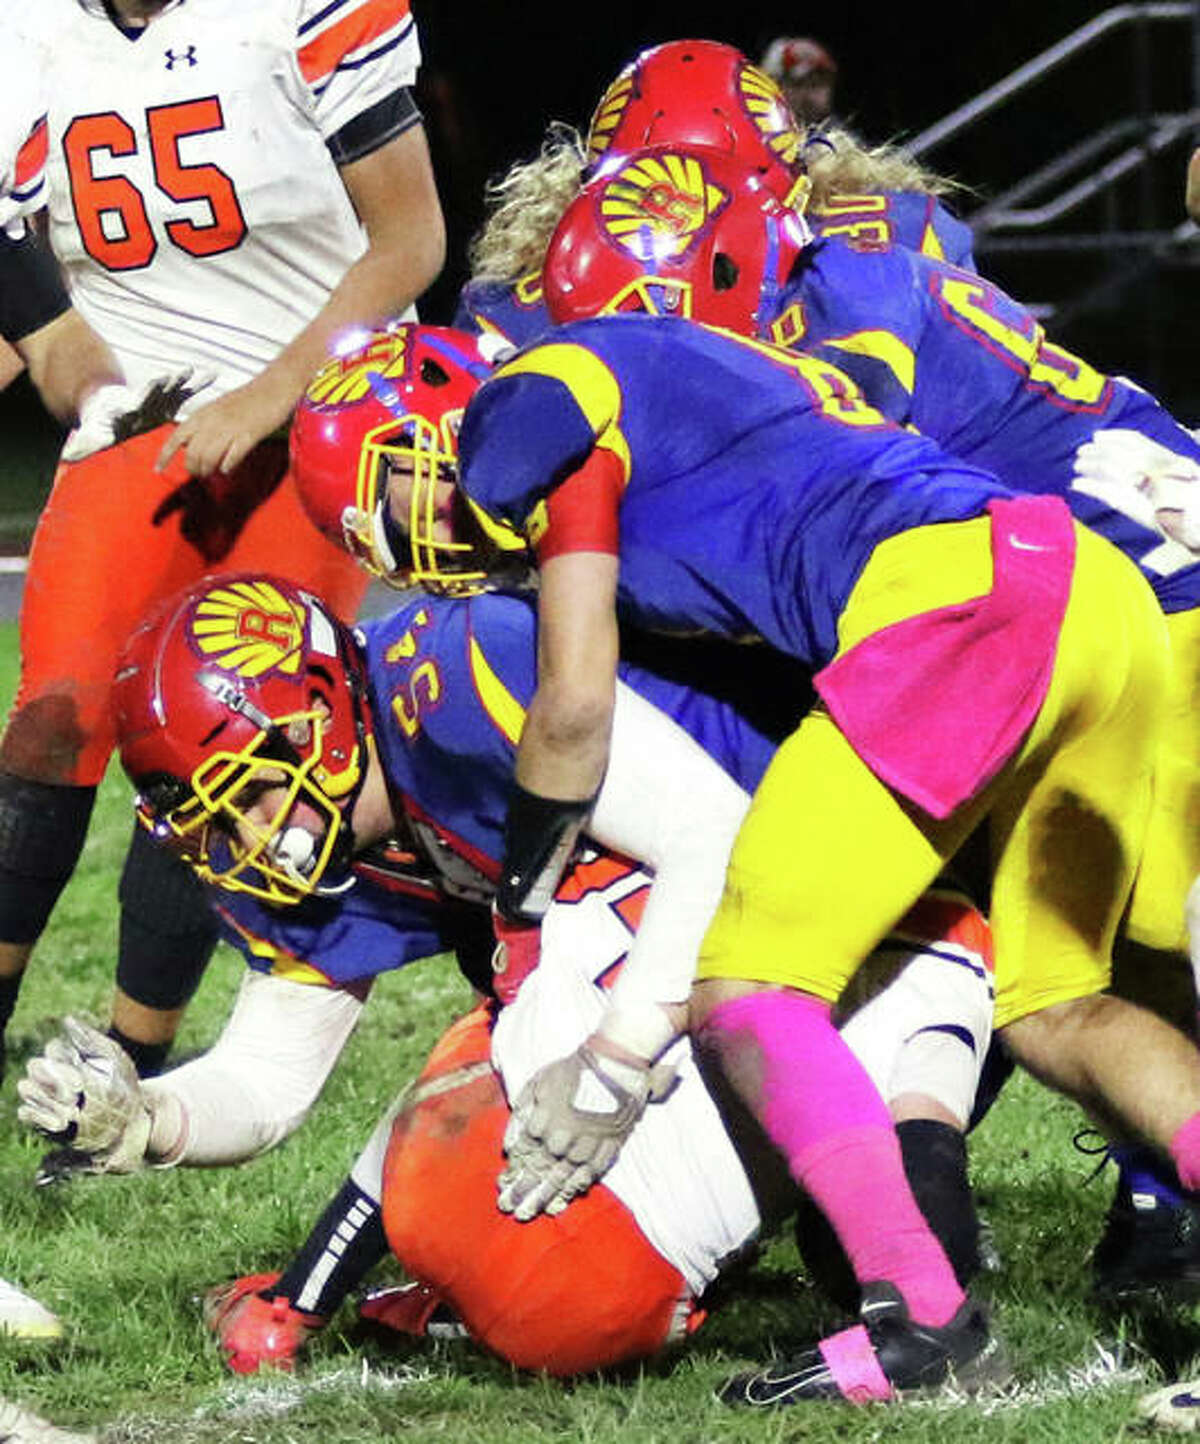 Gillespie running back C.J. Frensko (bottom) is taken down by a stack of Shells on Friday night in Roxana.